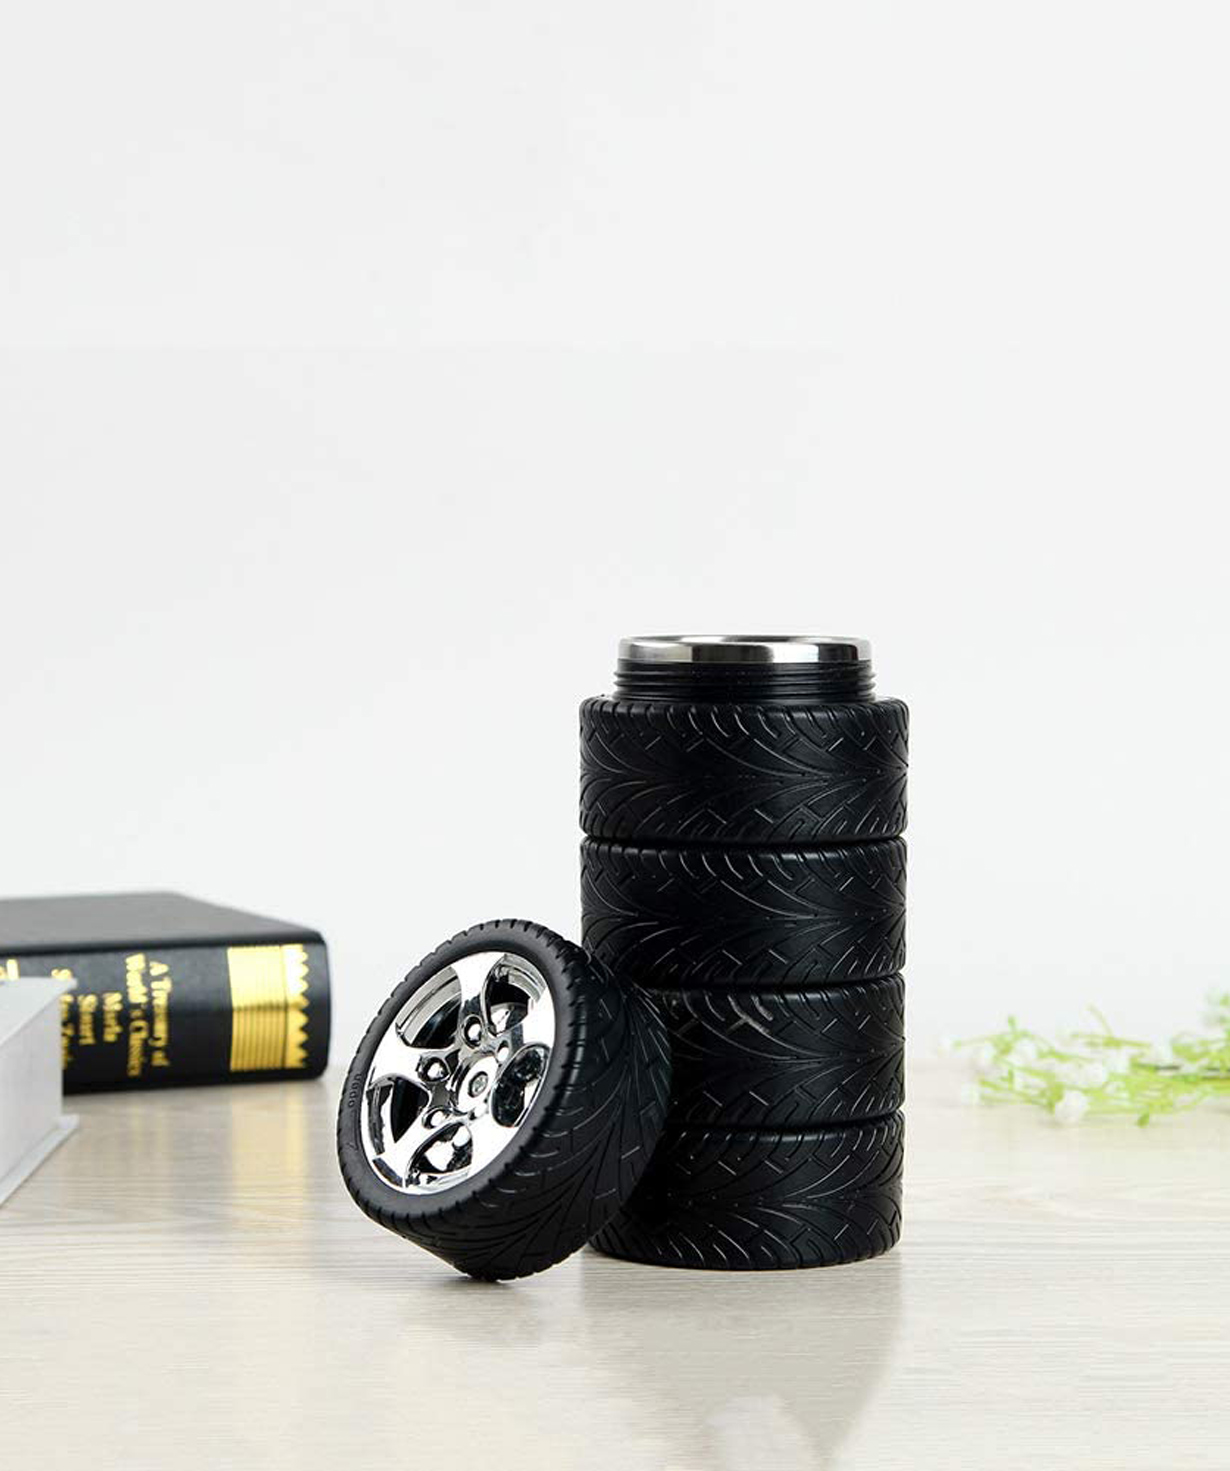 Thermo cup `Creative Gifts` tire